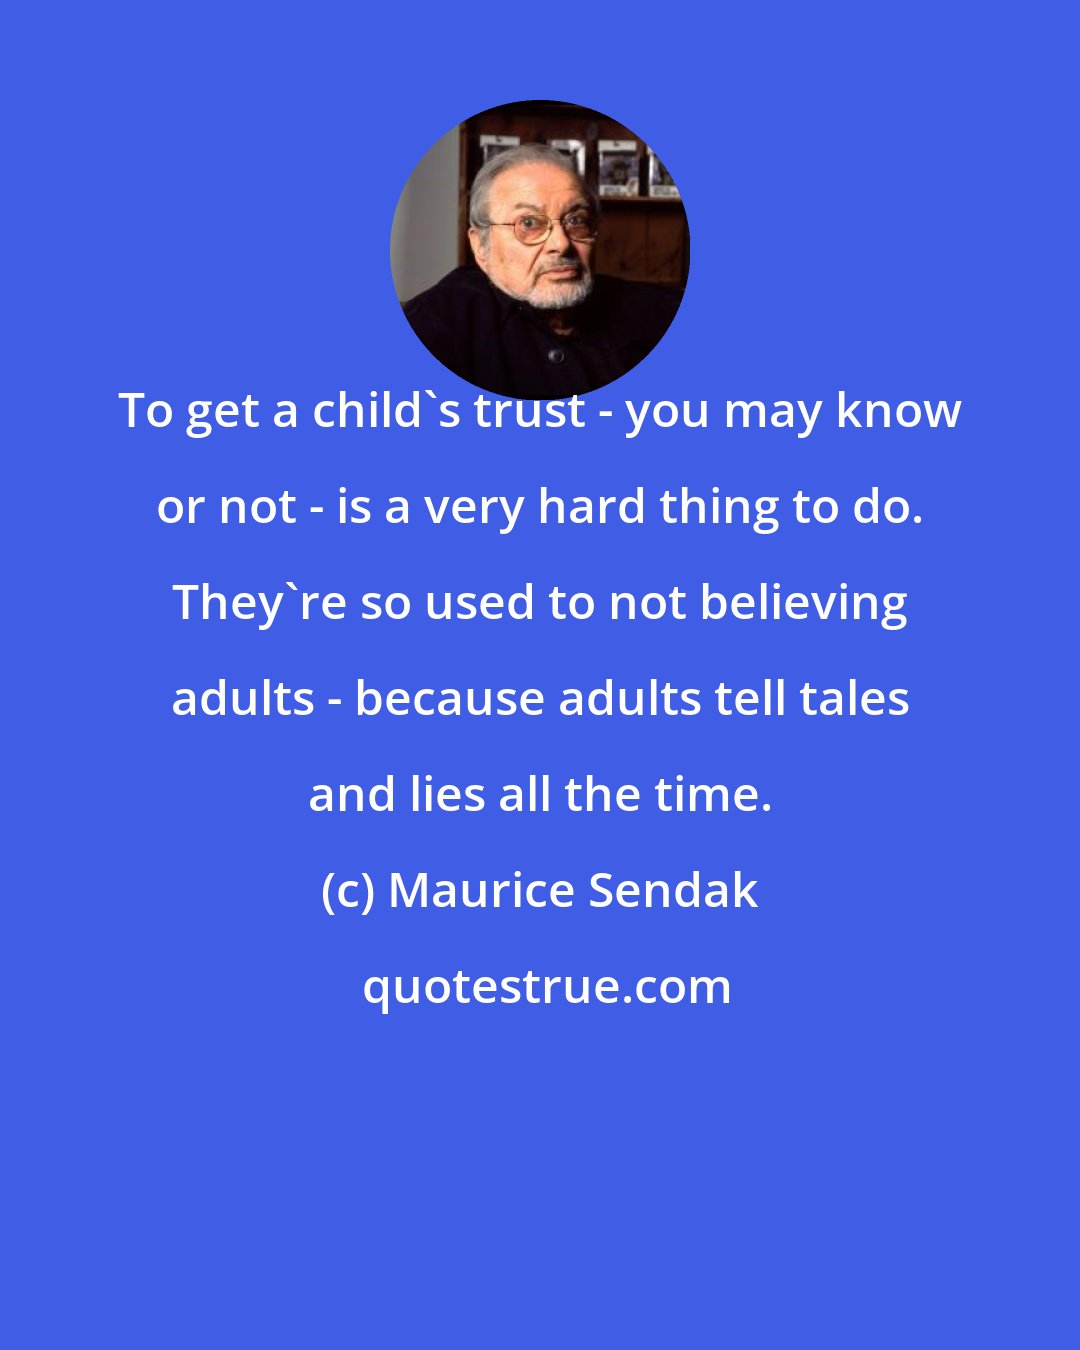 Maurice Sendak: To get a child's trust - you may know or not - is a very hard thing to do. They're so used to not believing adults - because adults tell tales and lies all the time.